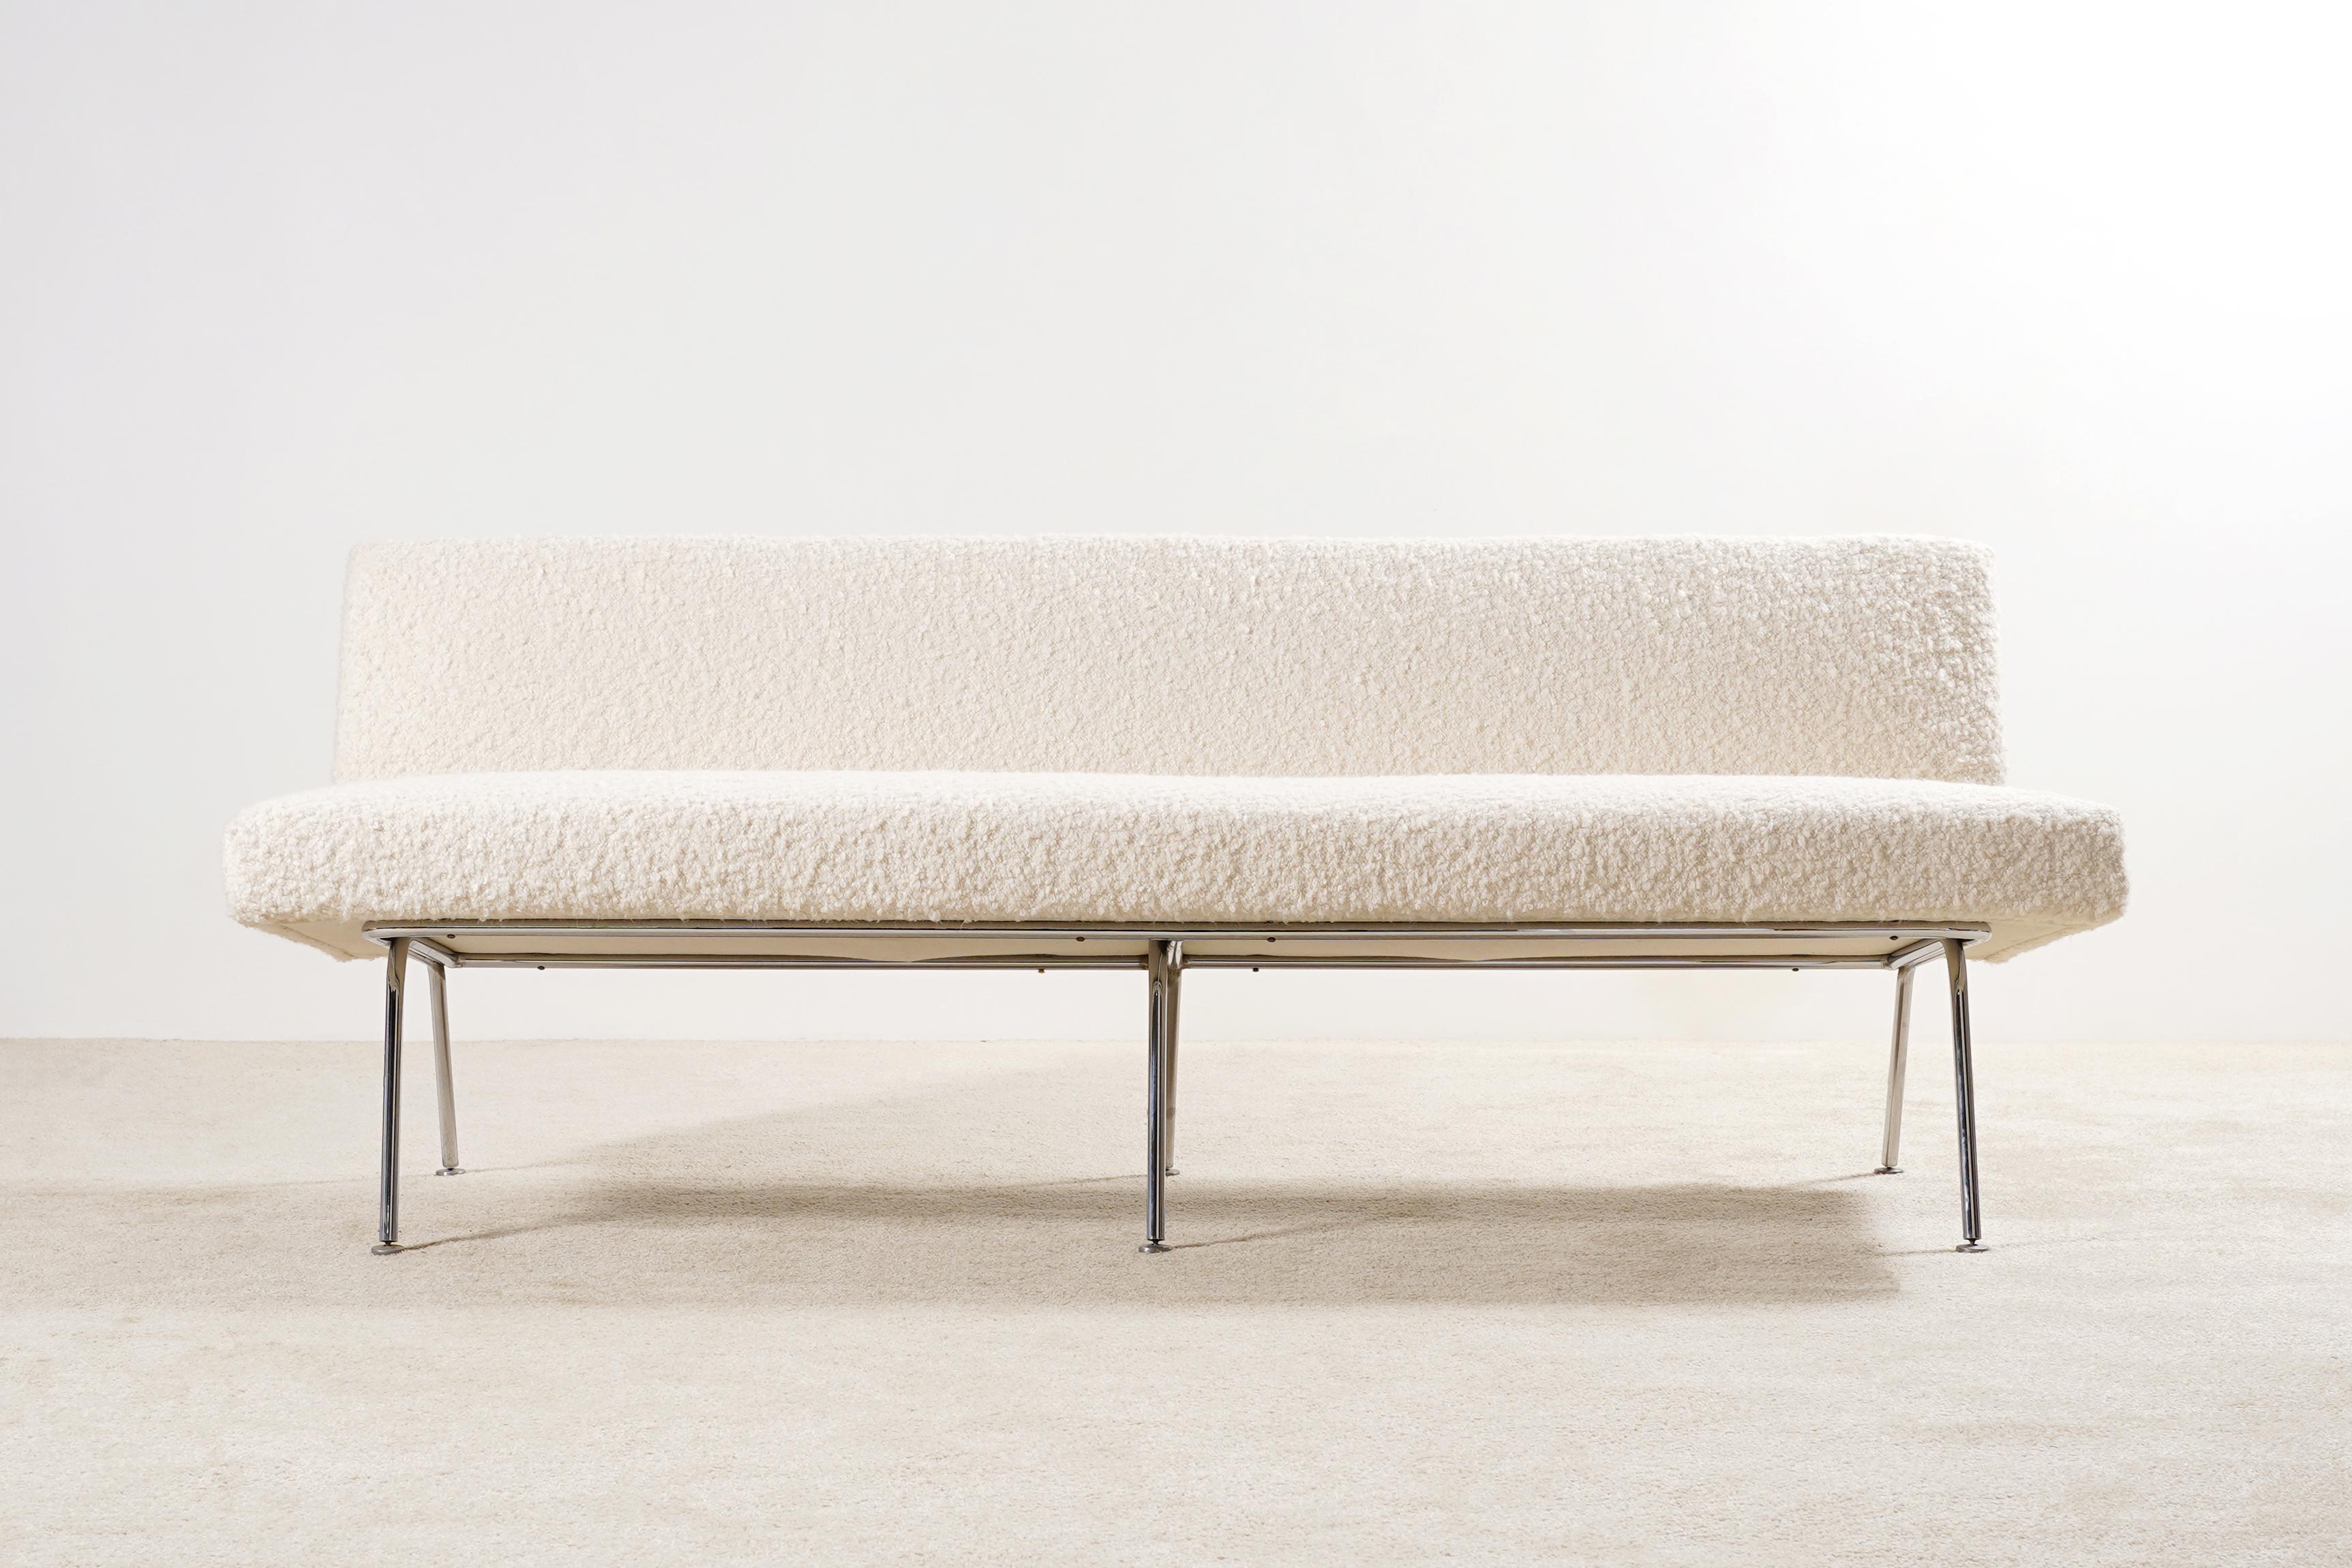 Three seat sofa model 33 designed by Florence Knoll and produced by Knoll International, circa 1960.
This sofa was manufactured only from 1954 to 1968.
Original Piece from the 1960s Newly re-upholstered in the traditional way by the best French